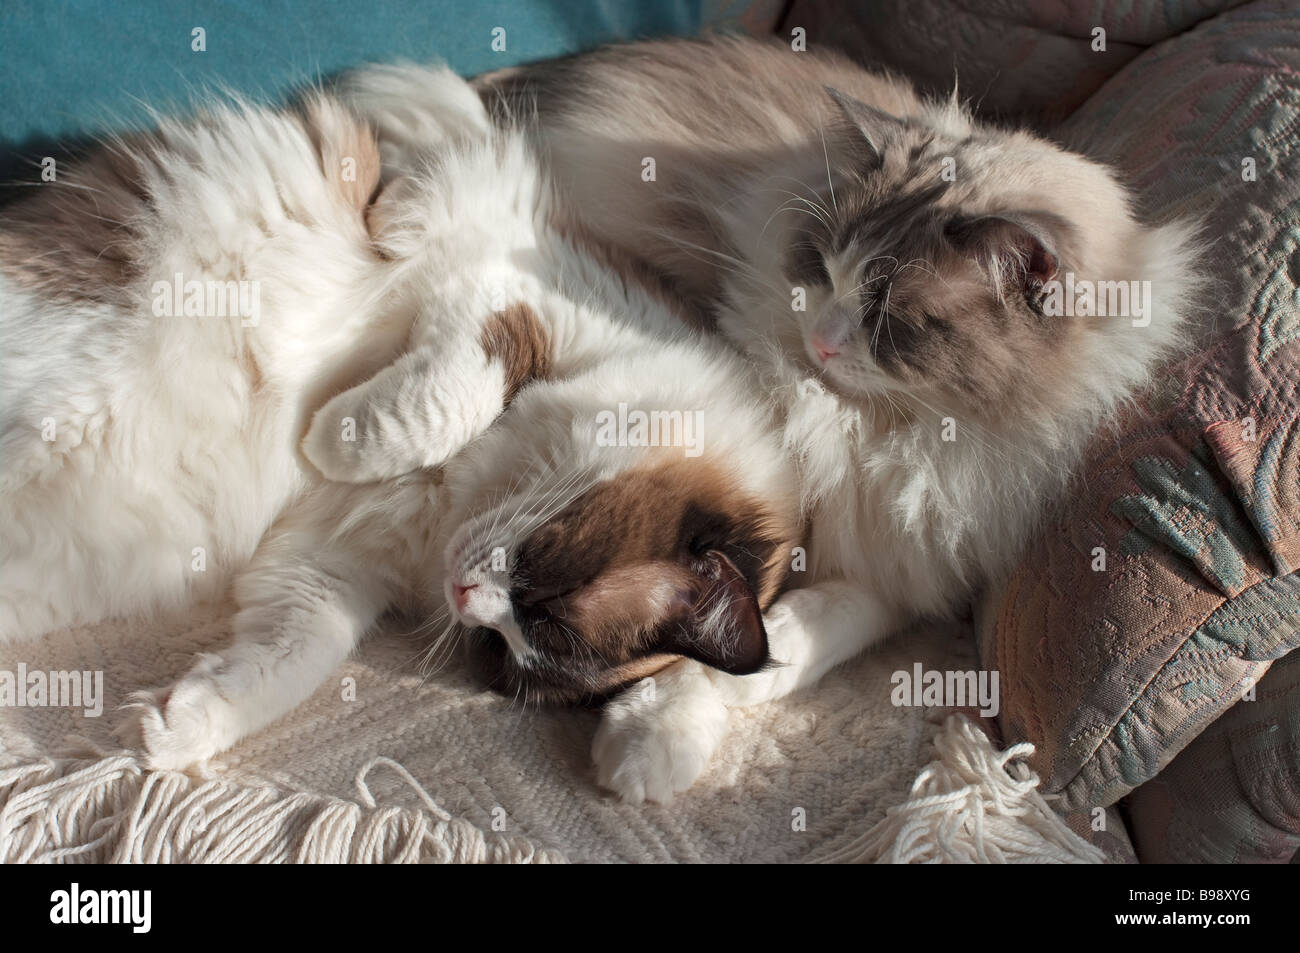 Fast asleep Two young Ragdoll cats cuddling together in an armchair Stock Photo